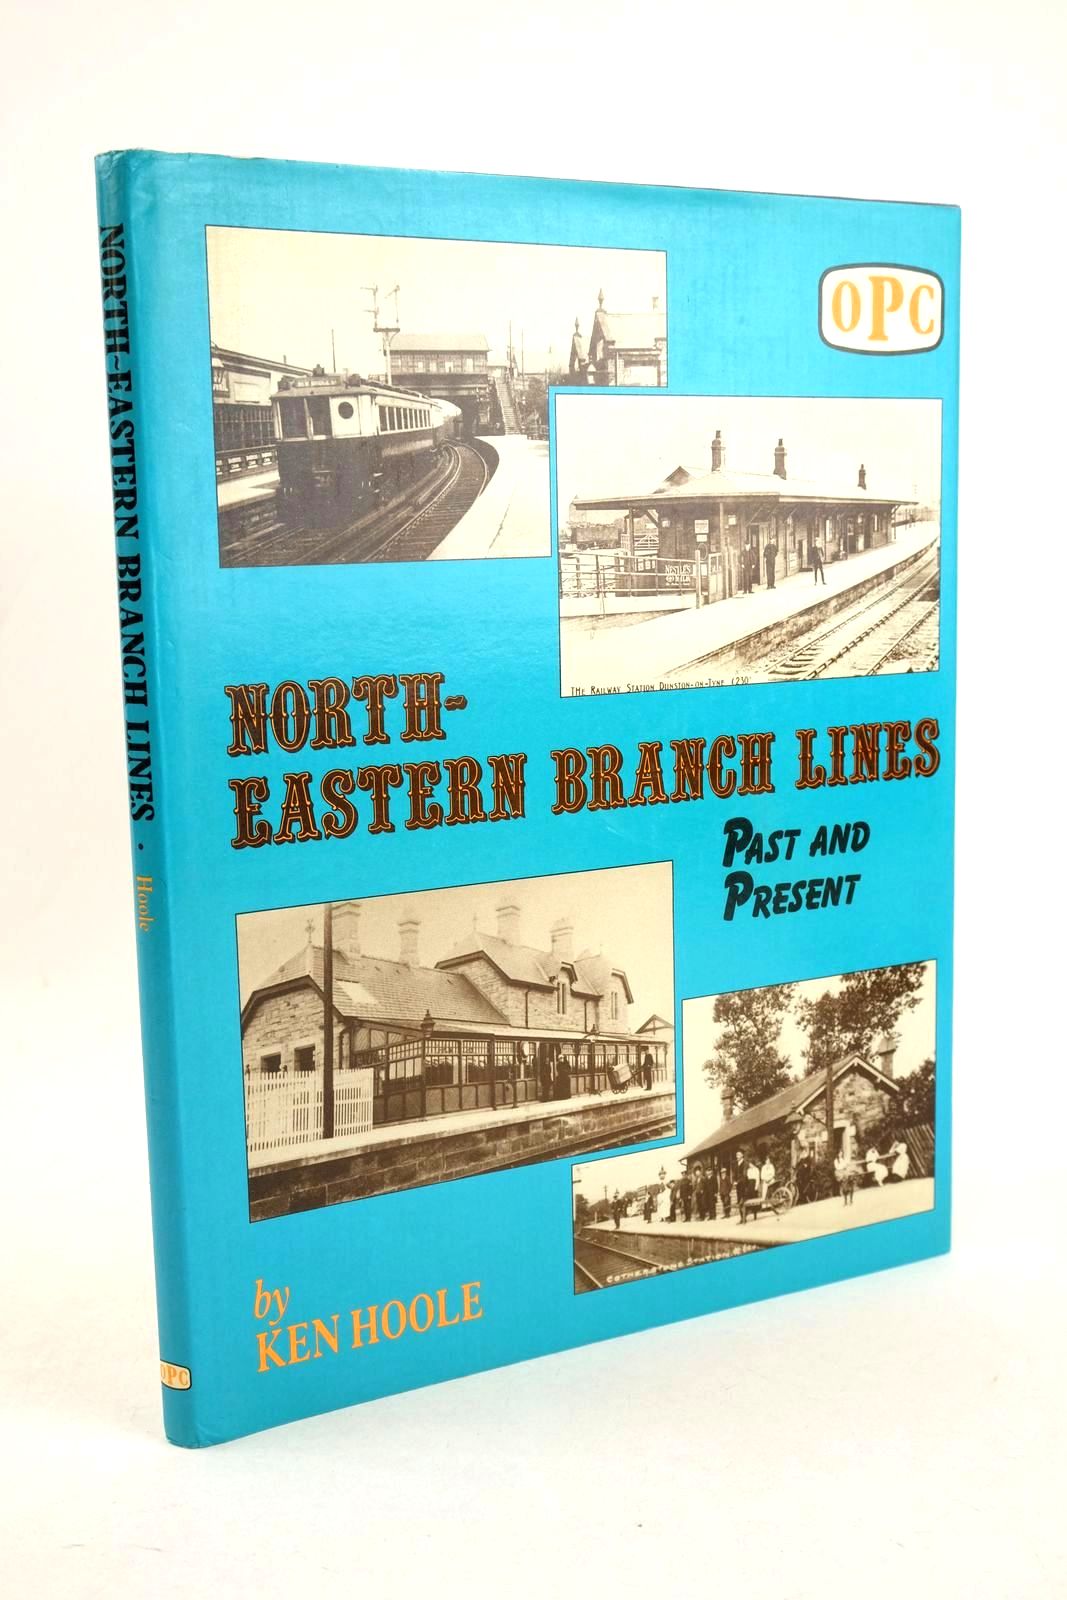 Photo of NORTH-EASTERN BRANCH LINES PAST AND PRESENT written by Hoole, Ken published by Oxford Publishing Co (STOCK CODE: 1327230)  for sale by Stella & Rose's Books